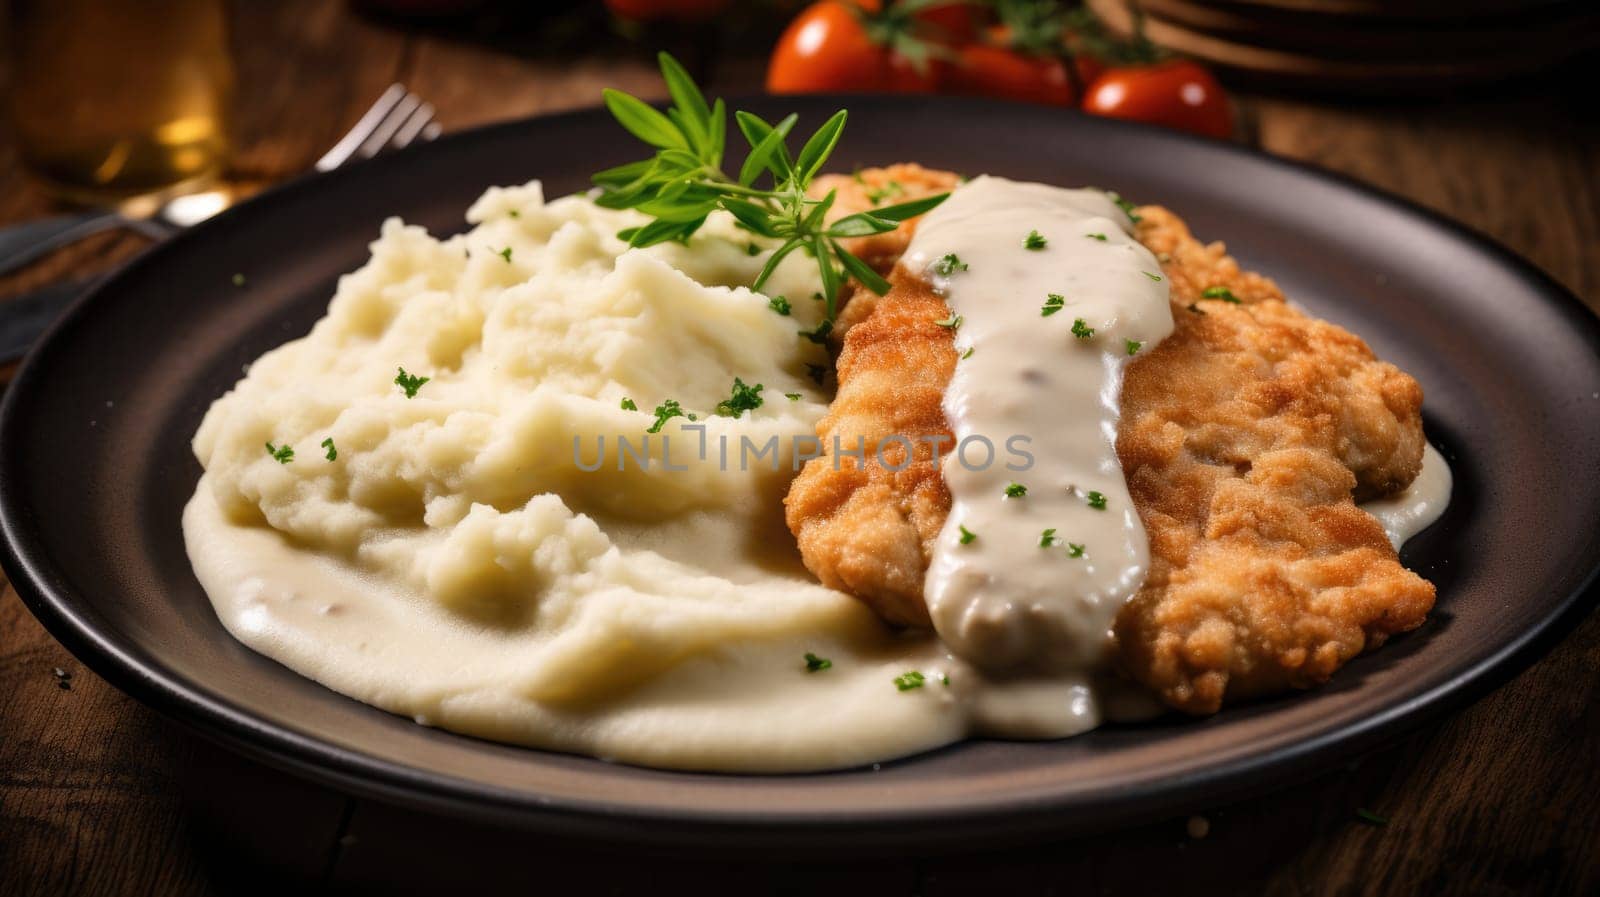 Traditional German pork Schnitzel with cream sauce by natali_brill